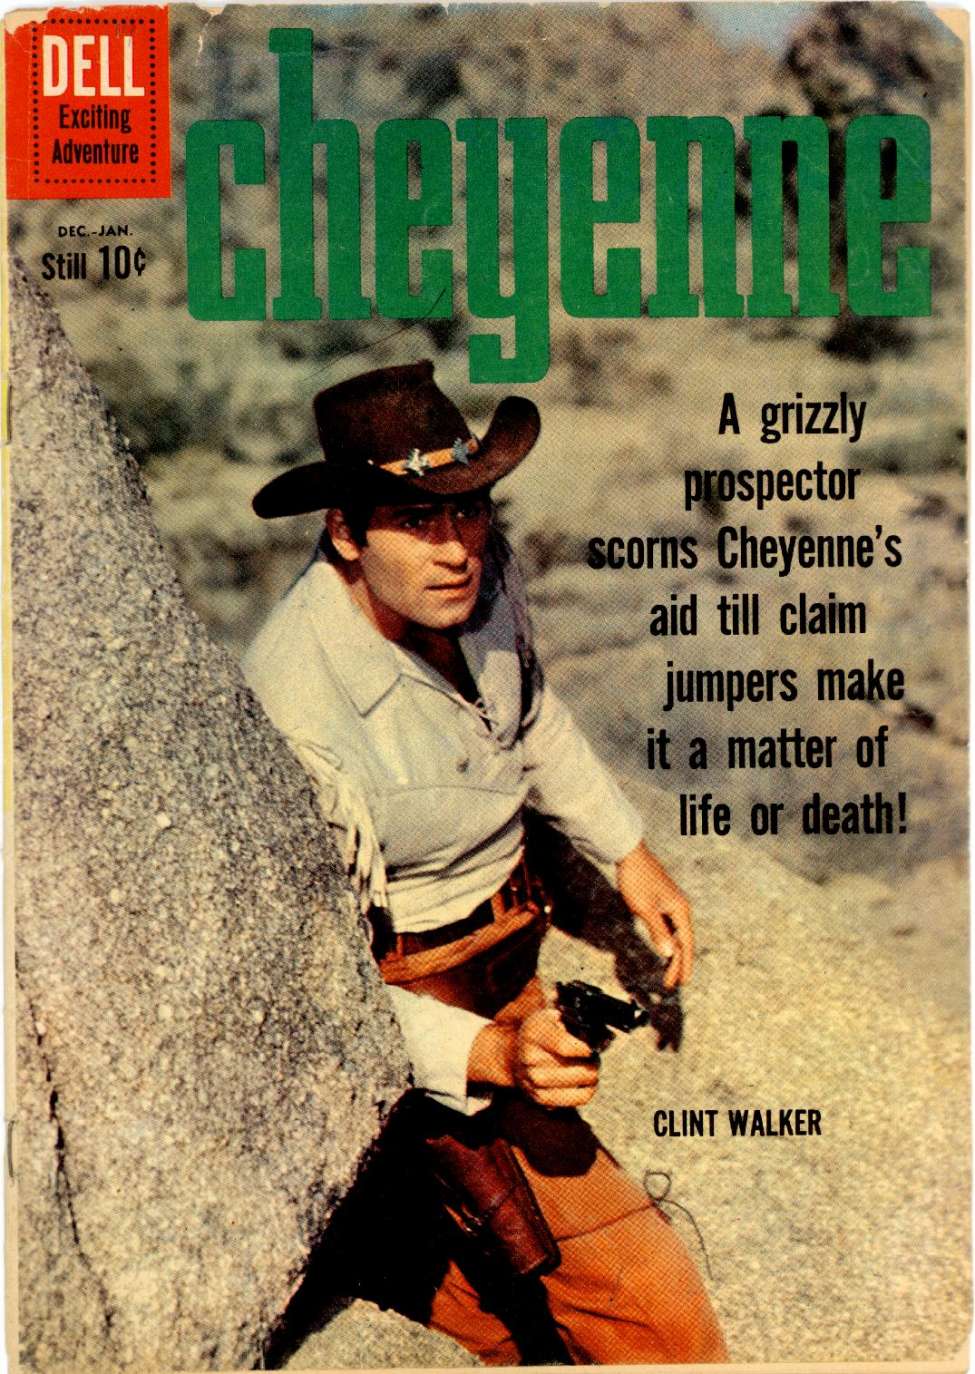 Book Cover For Cheyenne 19